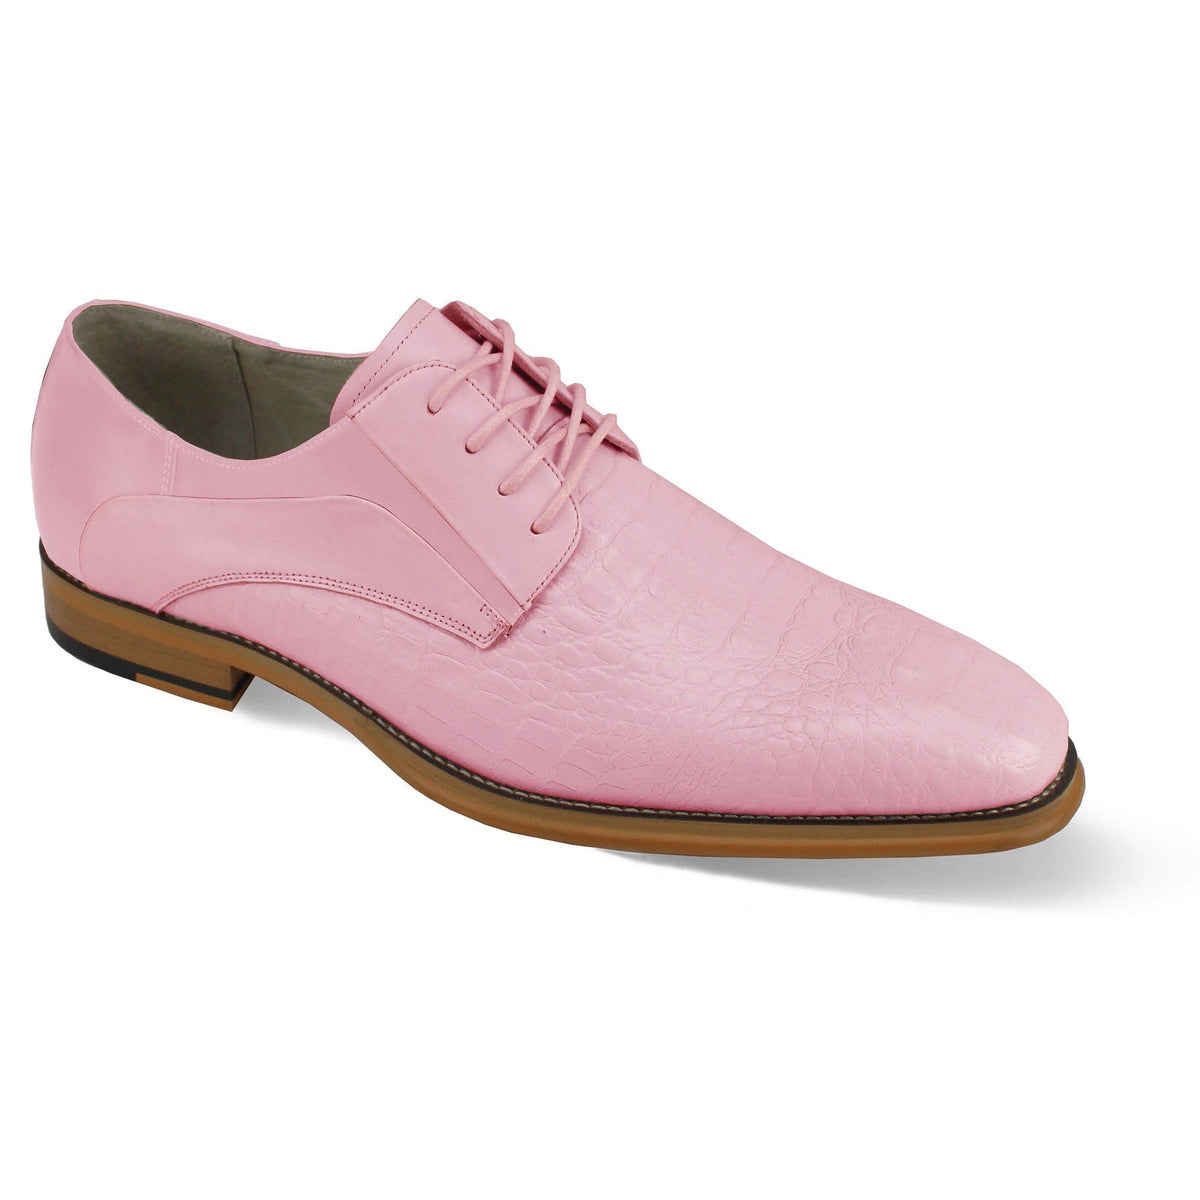 GIOVANNI LEATHER SHOES FT PINK / 7 GIOVANNI LEATHER SHOES-MASON-PINK